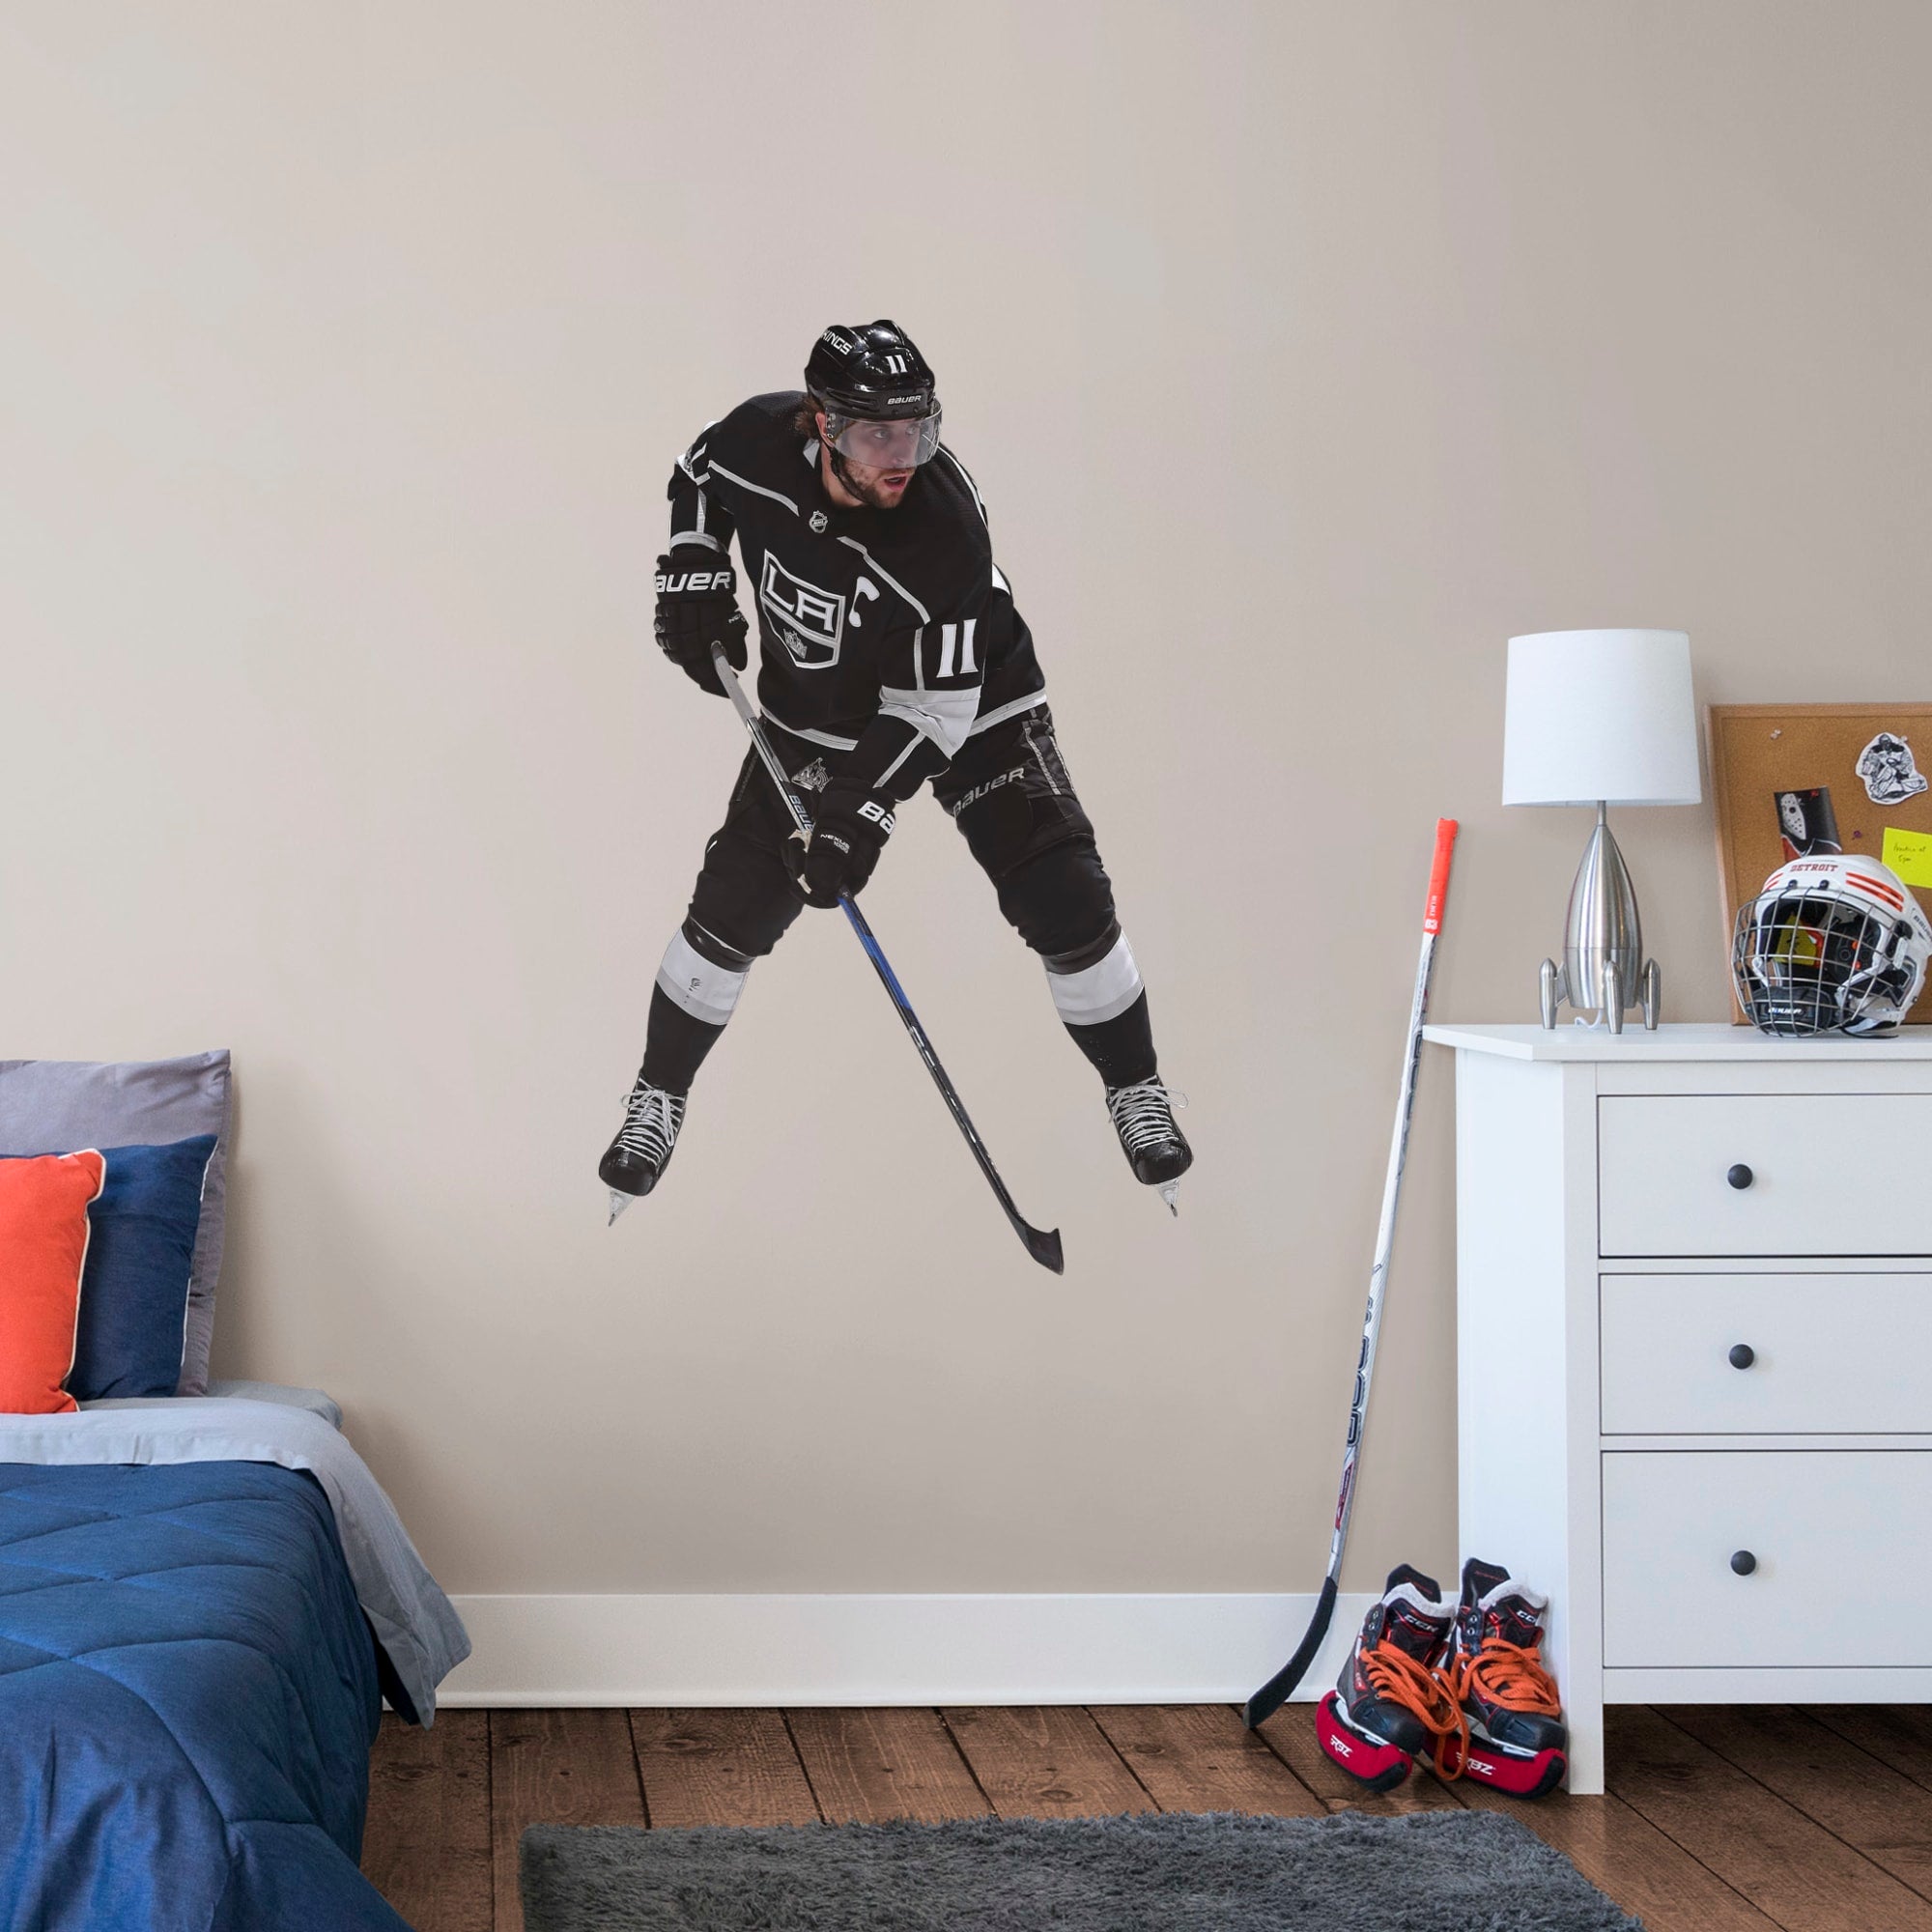 Anze Kopitar for Los Angeles Kings - Officially Licensed NHL Removable Wall Decal Giant Athlete + 2 Decals (32"W x 51"H) by Fath